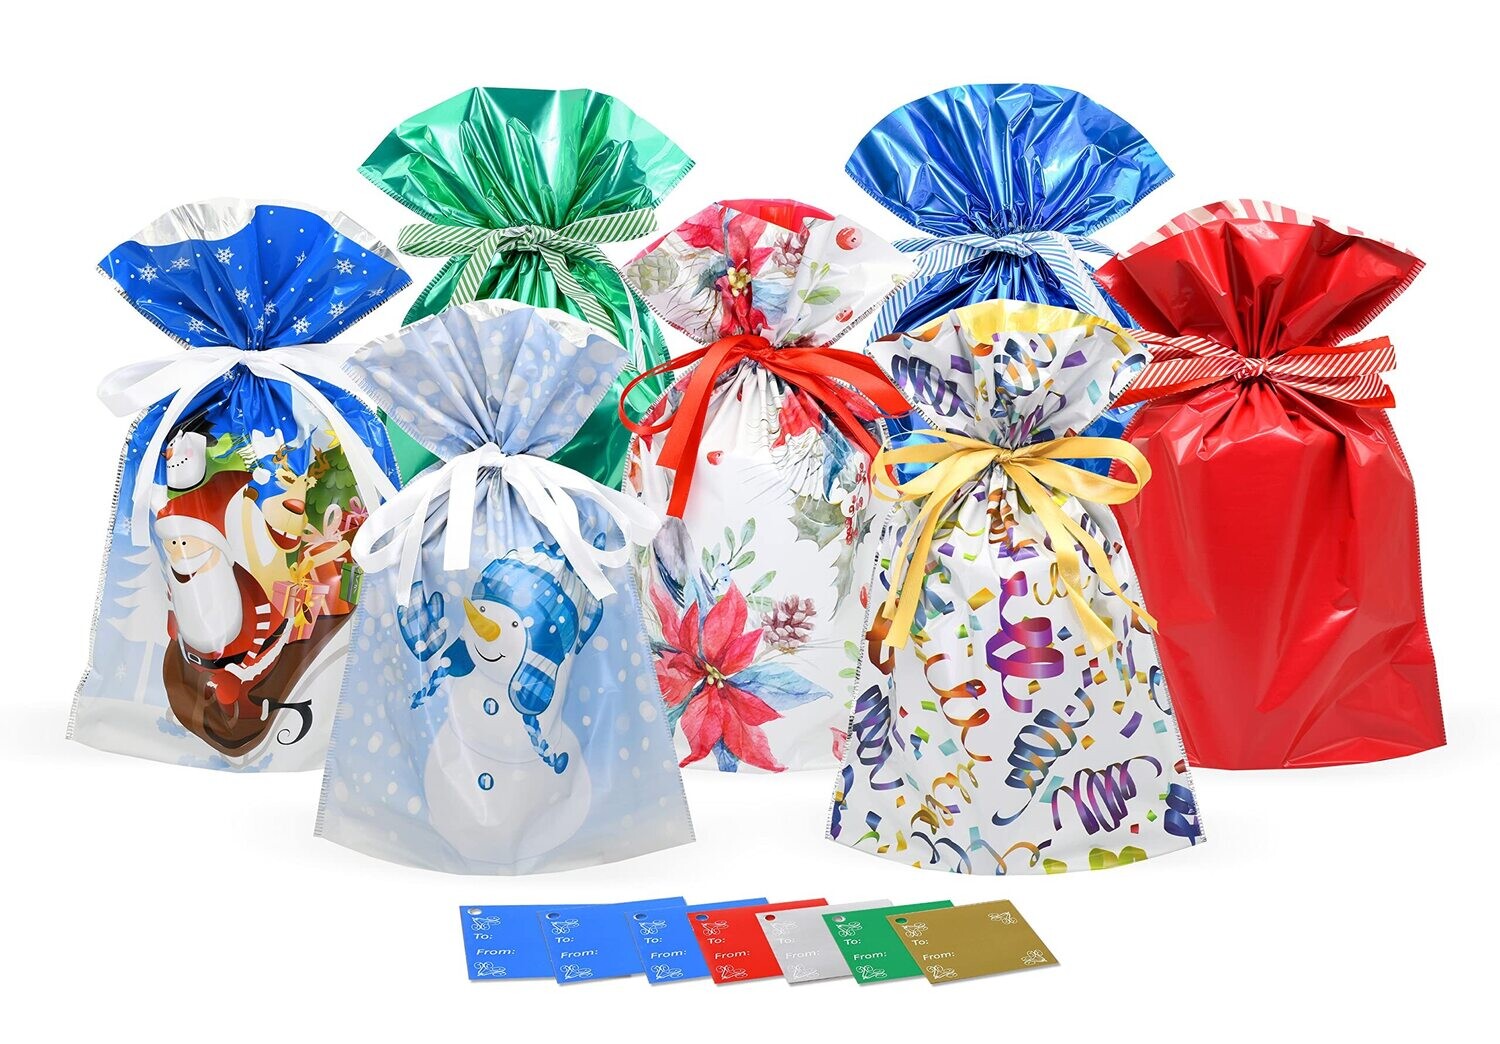 14-Piece Large Christmas Themed Set (7 Gift Bags & 7 Gift Tags)